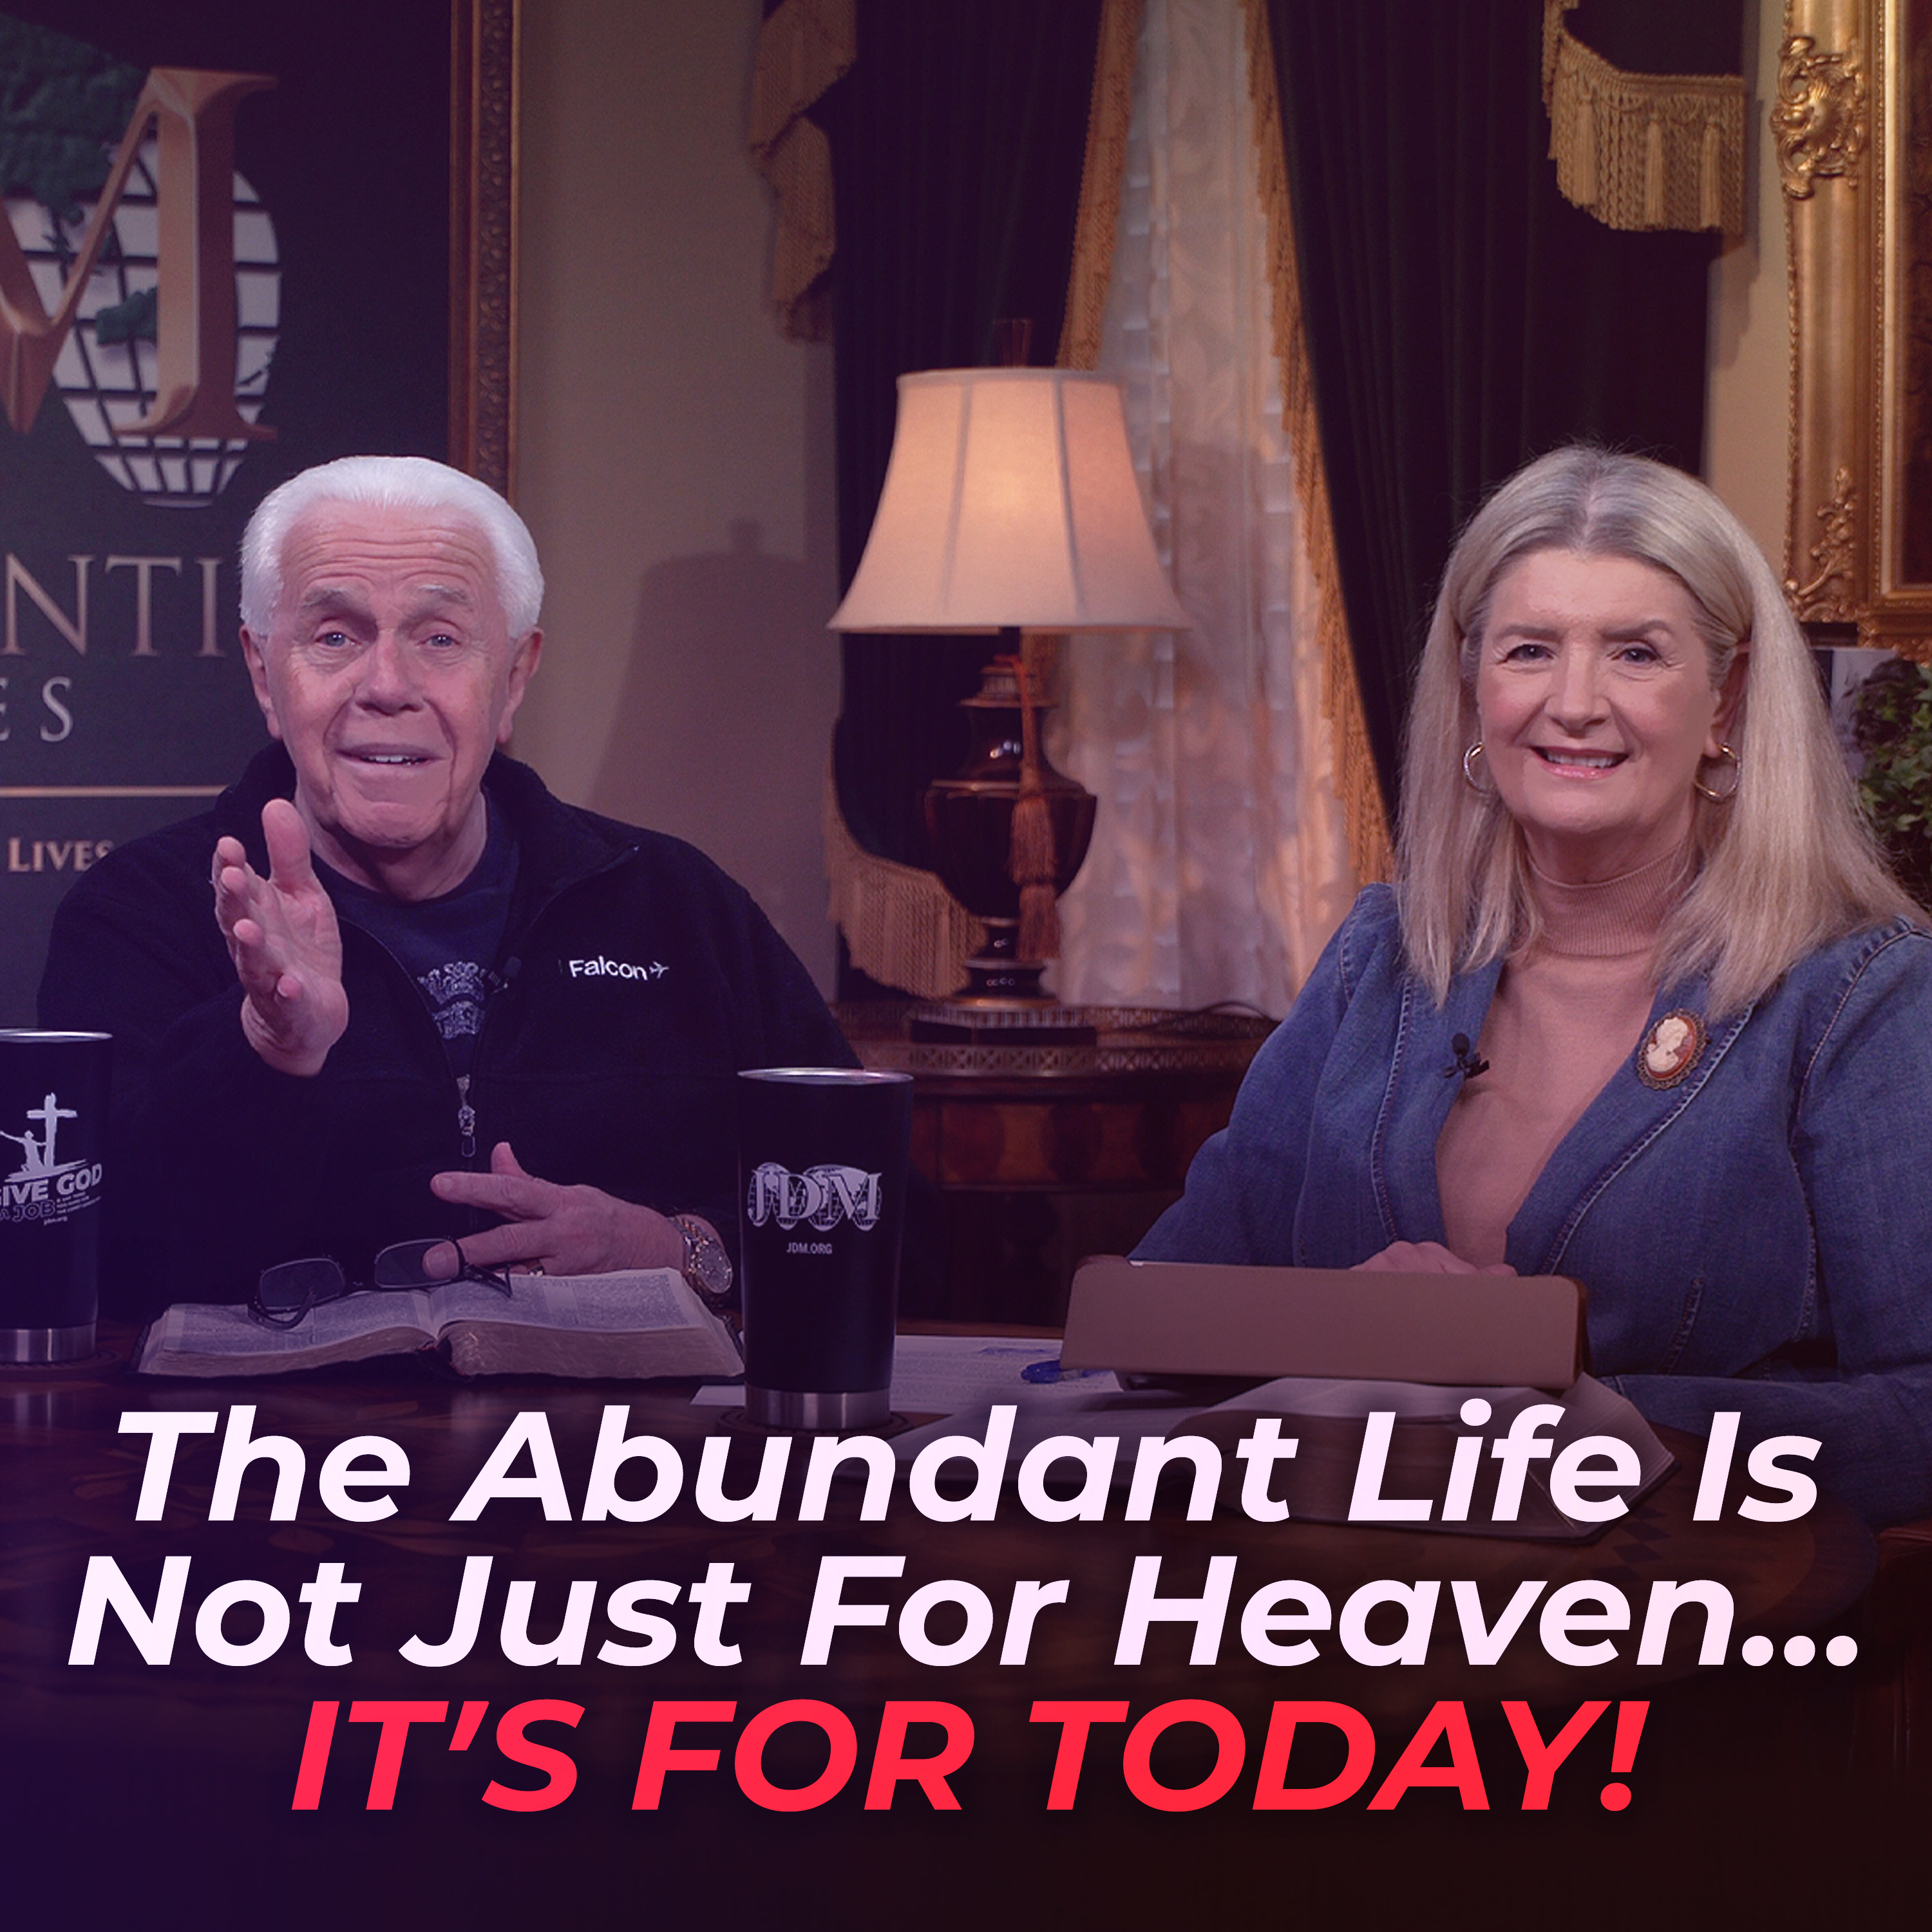 The Abundant Life Is Not Just For Heaven…It’s For Today!